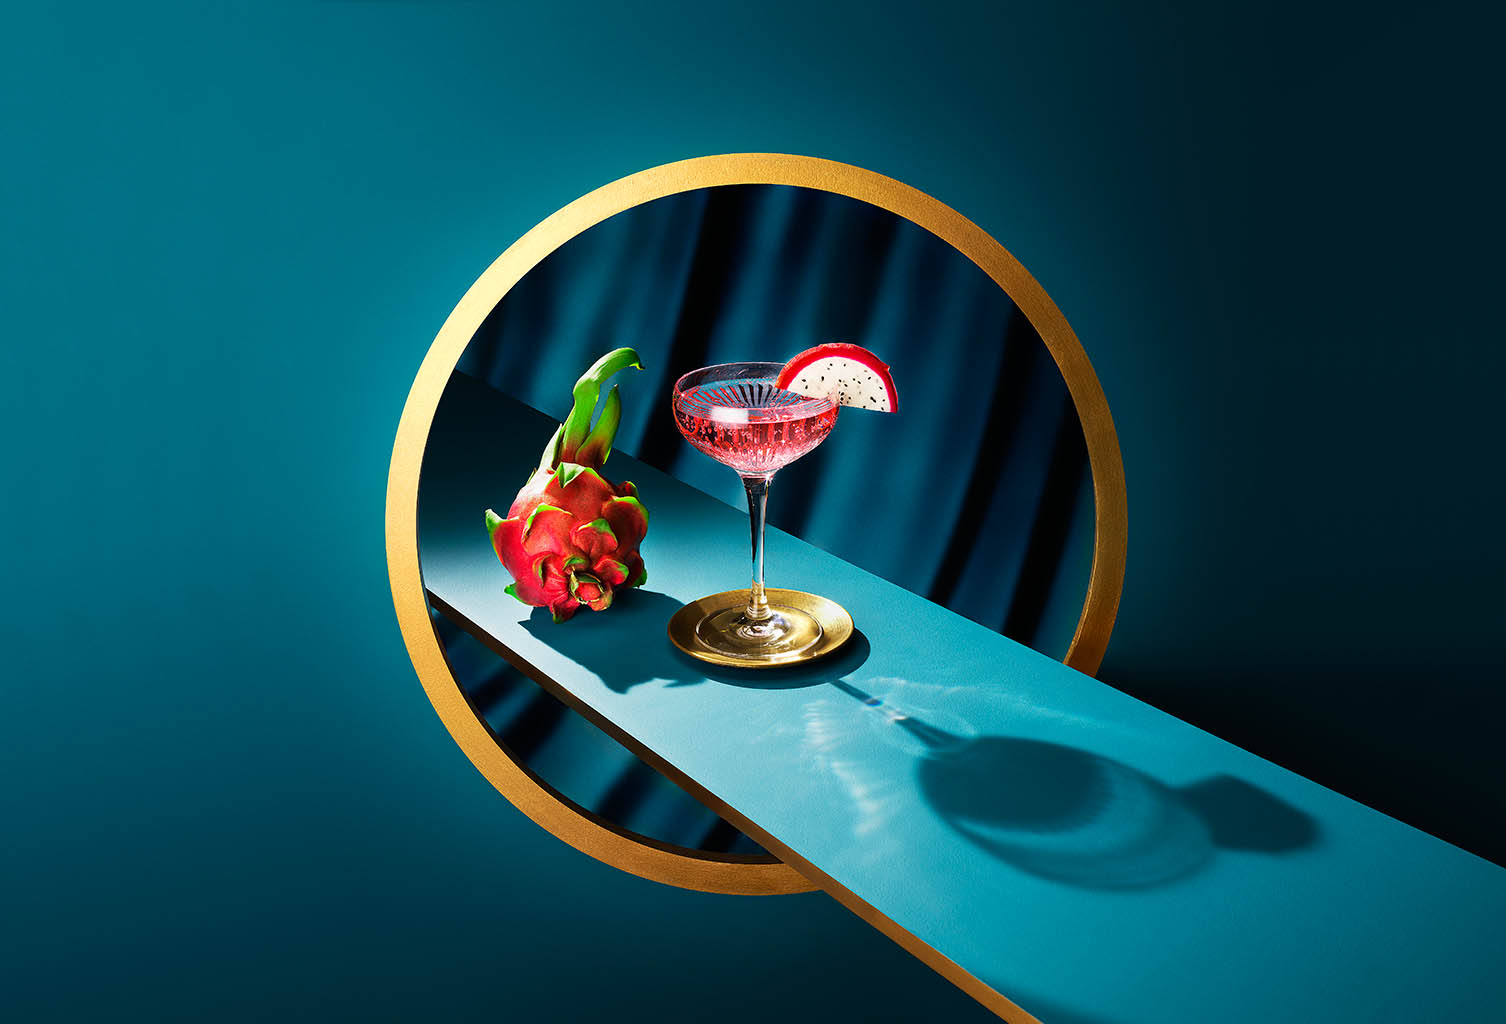 Advertising Still Life Product Photography of Moet & Chandon cocktail serve by Packshot Factory